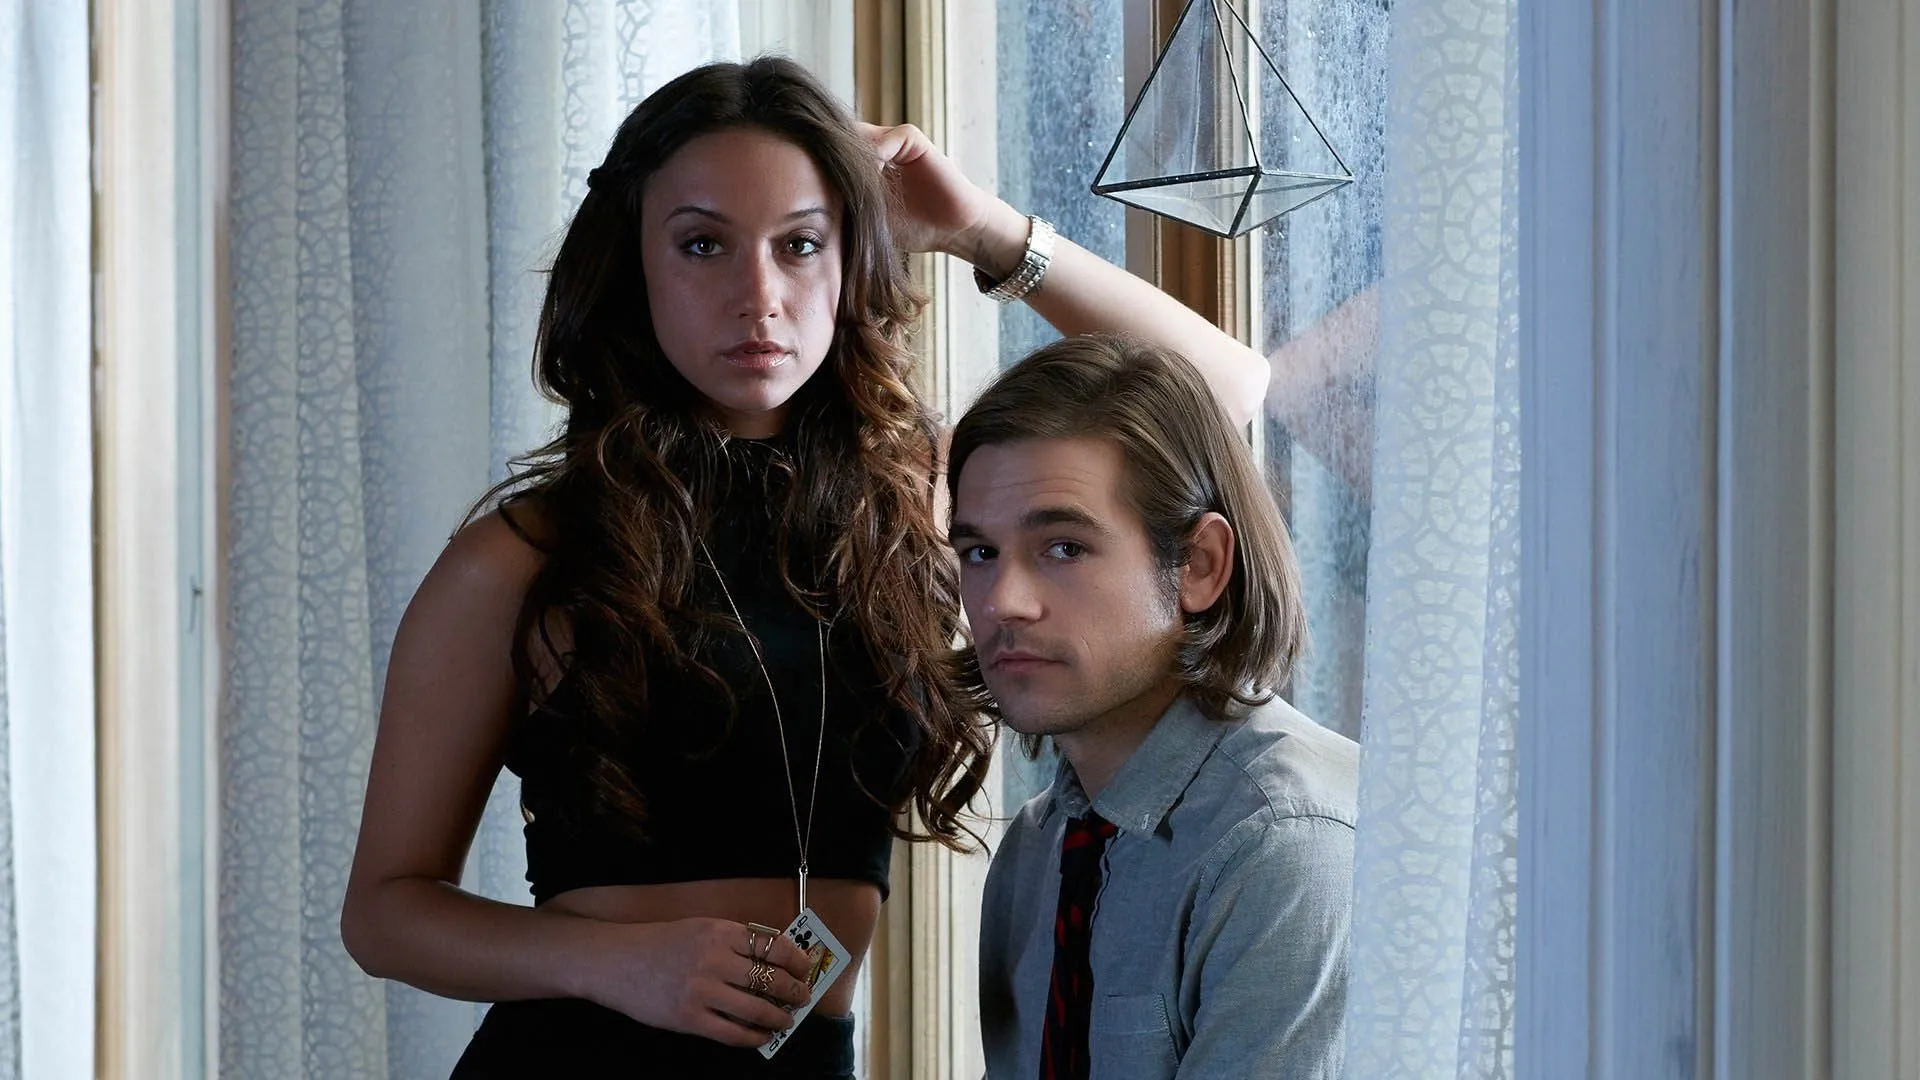 1920x1080 The Magicians Season 1 Review. Lev Grossman gives hope to Syfy